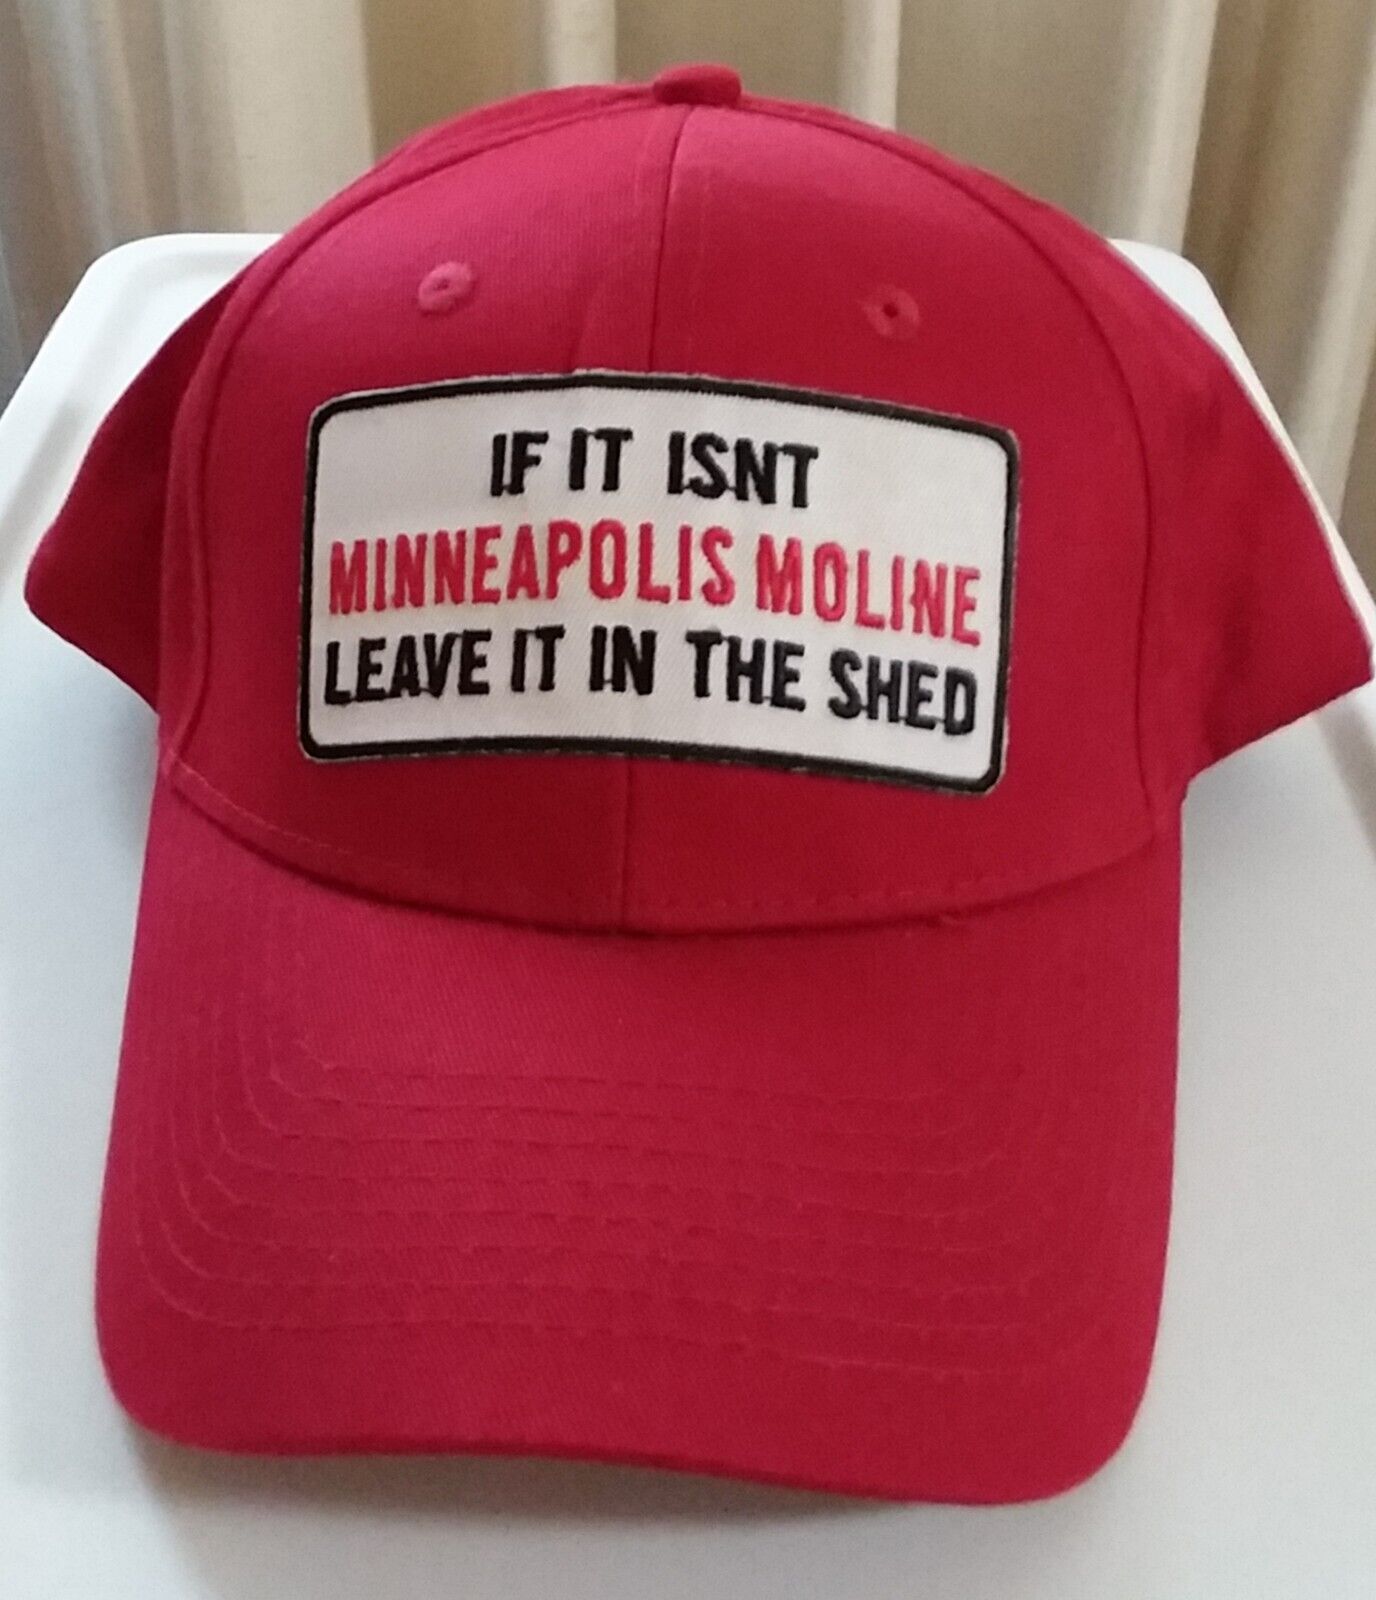 If It Isnt Minneapolis Moline Leave It In The Shed Baseball Cap Red Adjustable